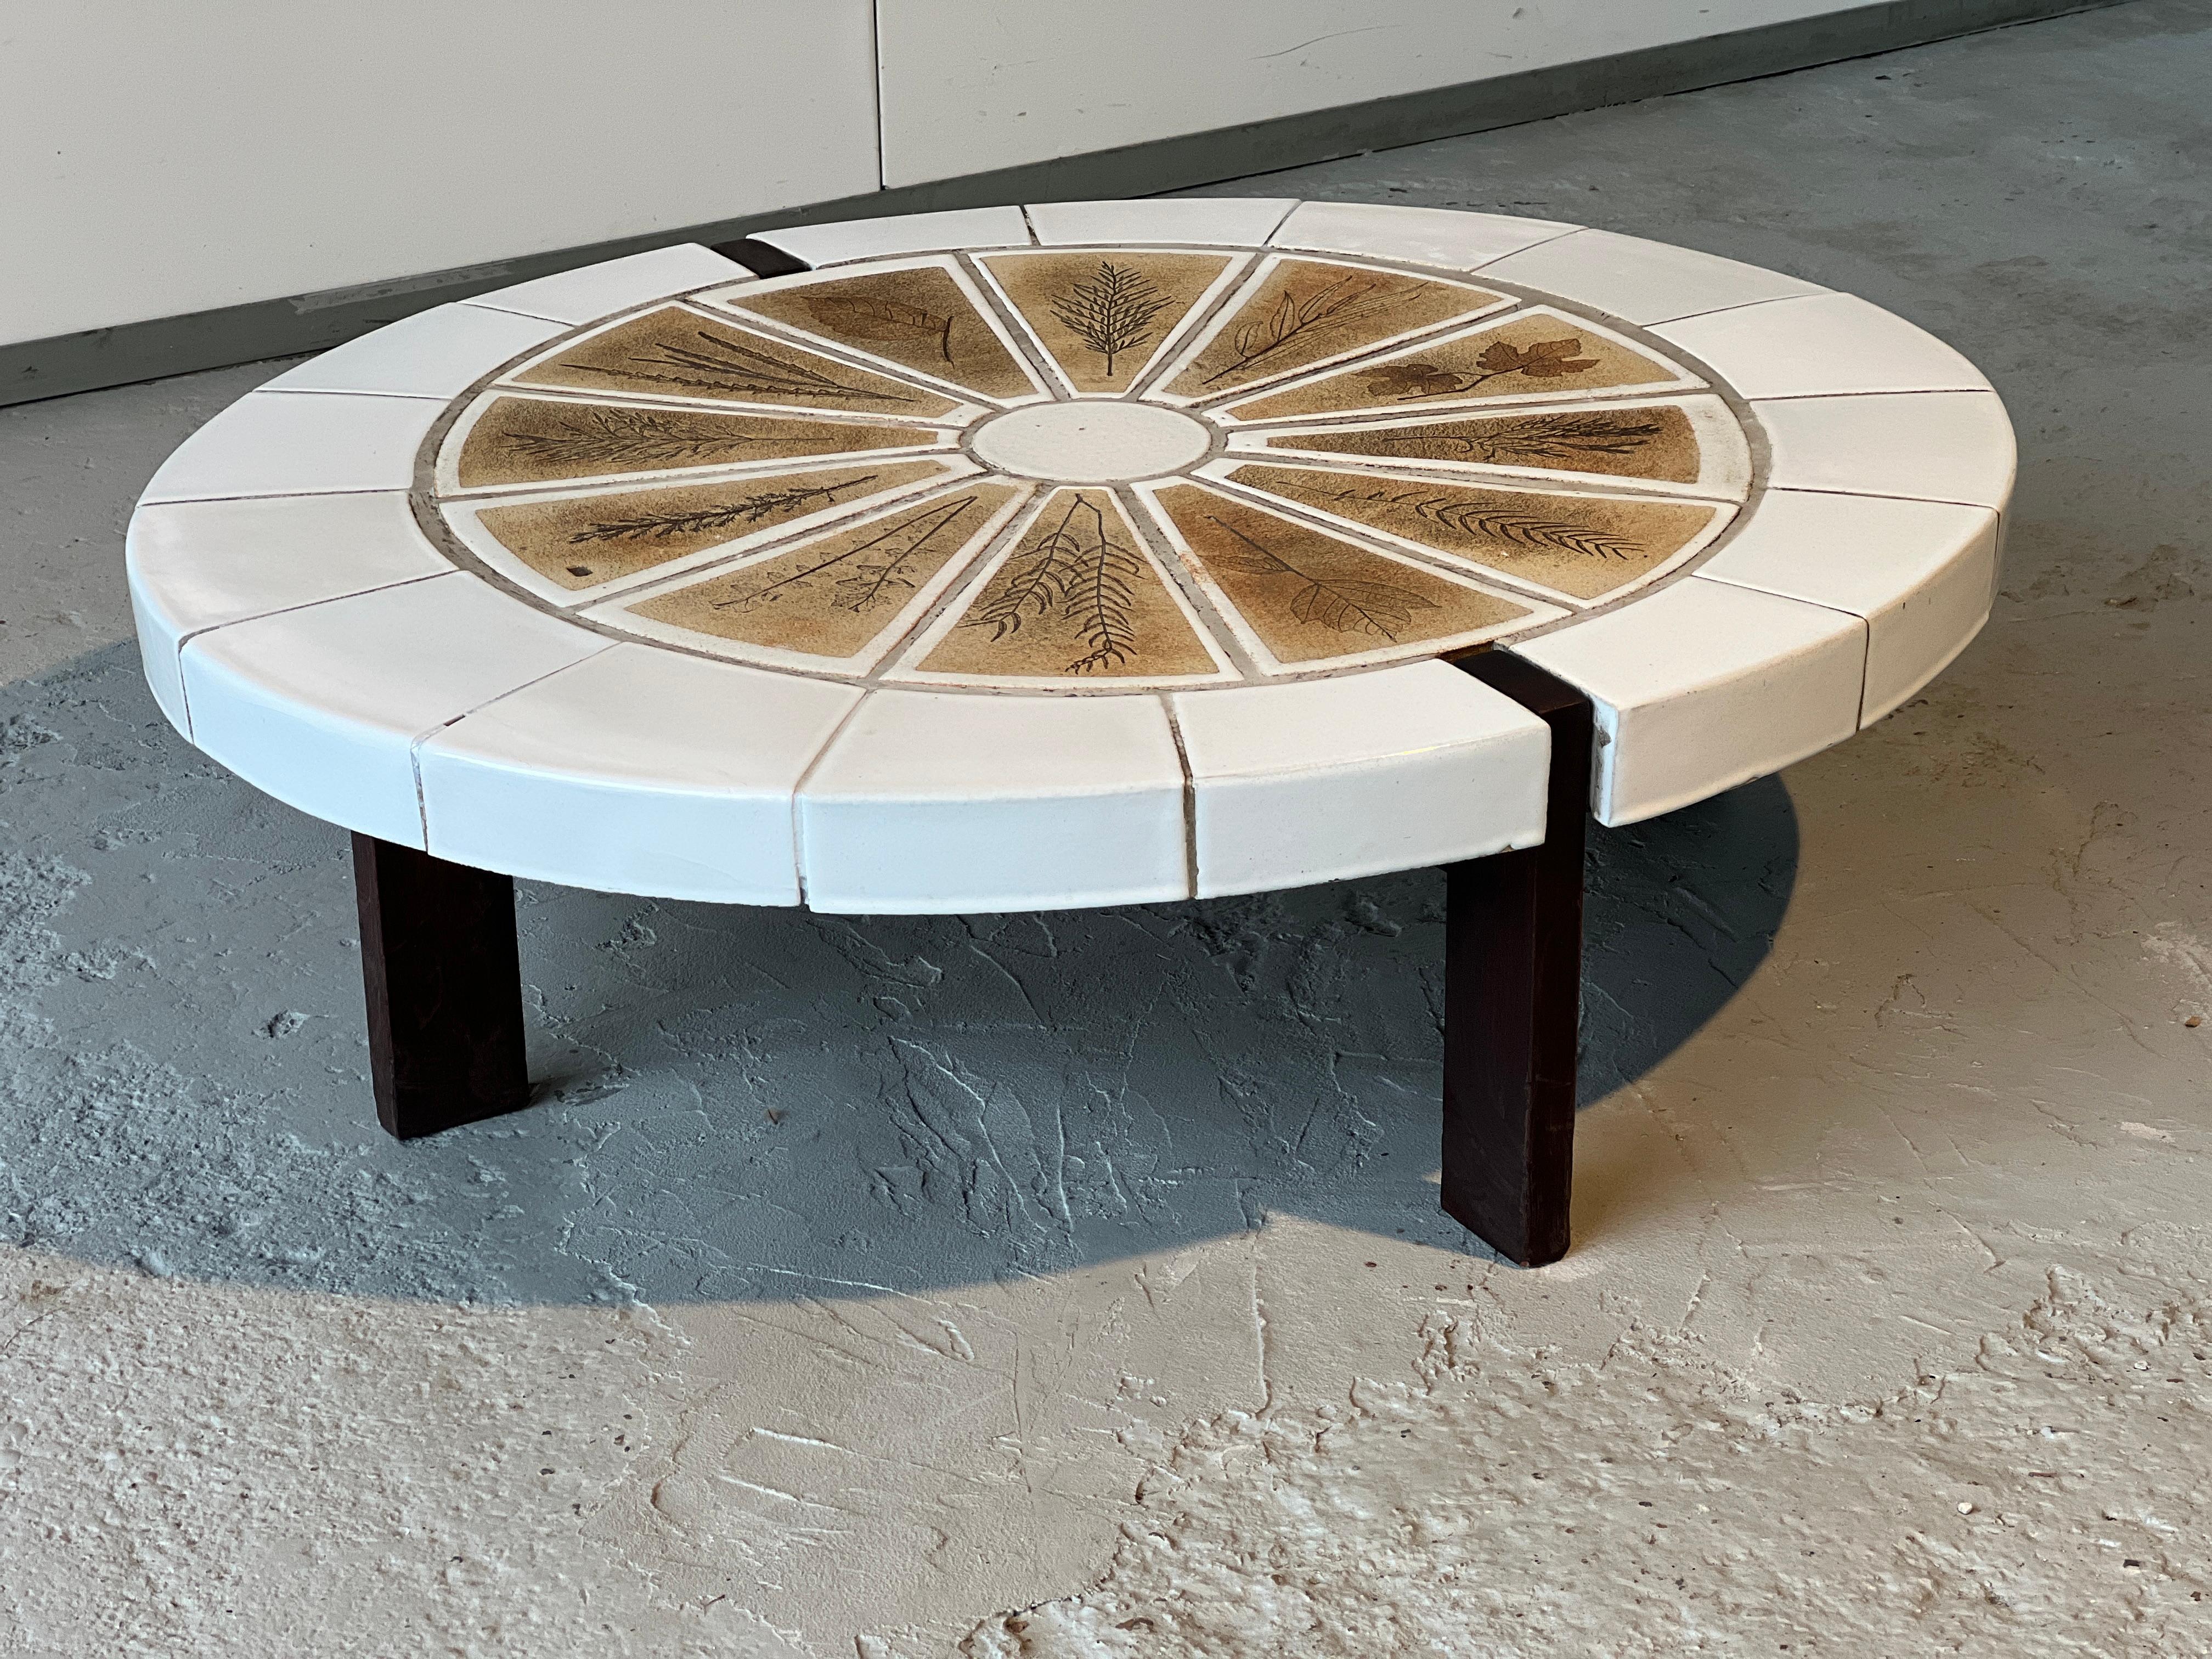 Roger Capron 1960 Coffee table in white ceramic and teracotta, oak structure. Signed on the ceramic 